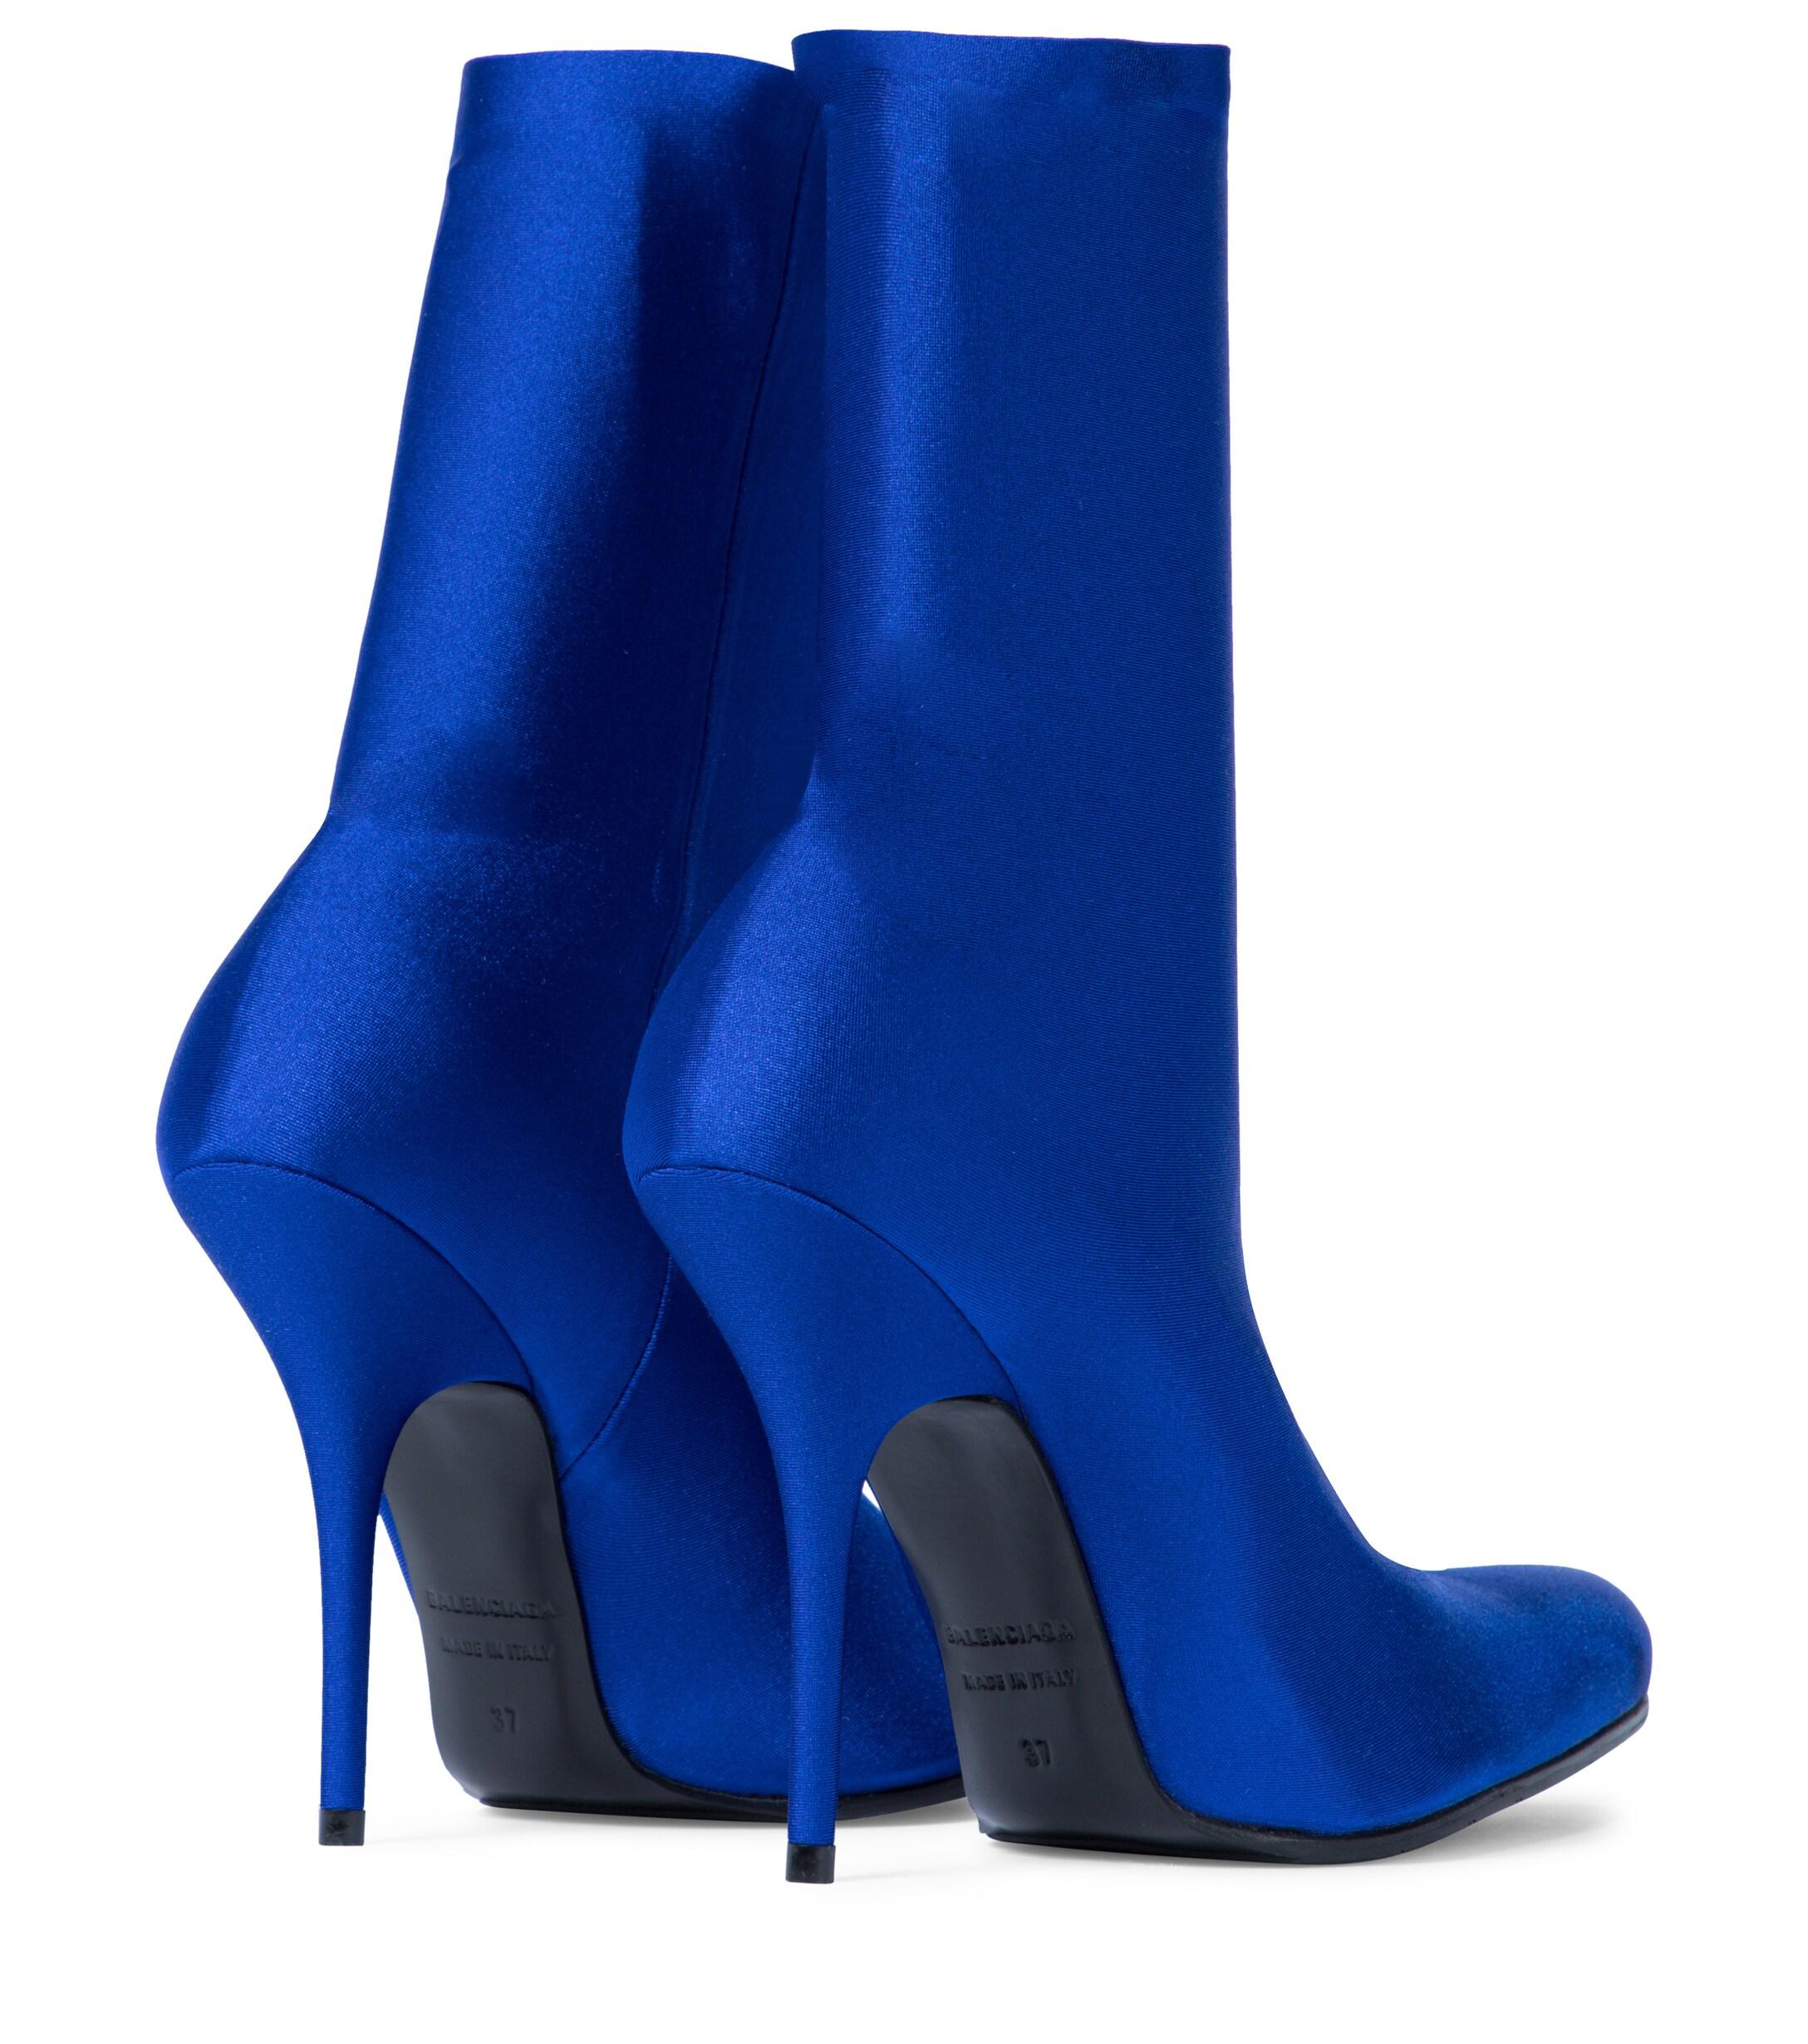 Mor motto Hemmelighed Balenciaga Knife Sock Boots in Blue | Lyst